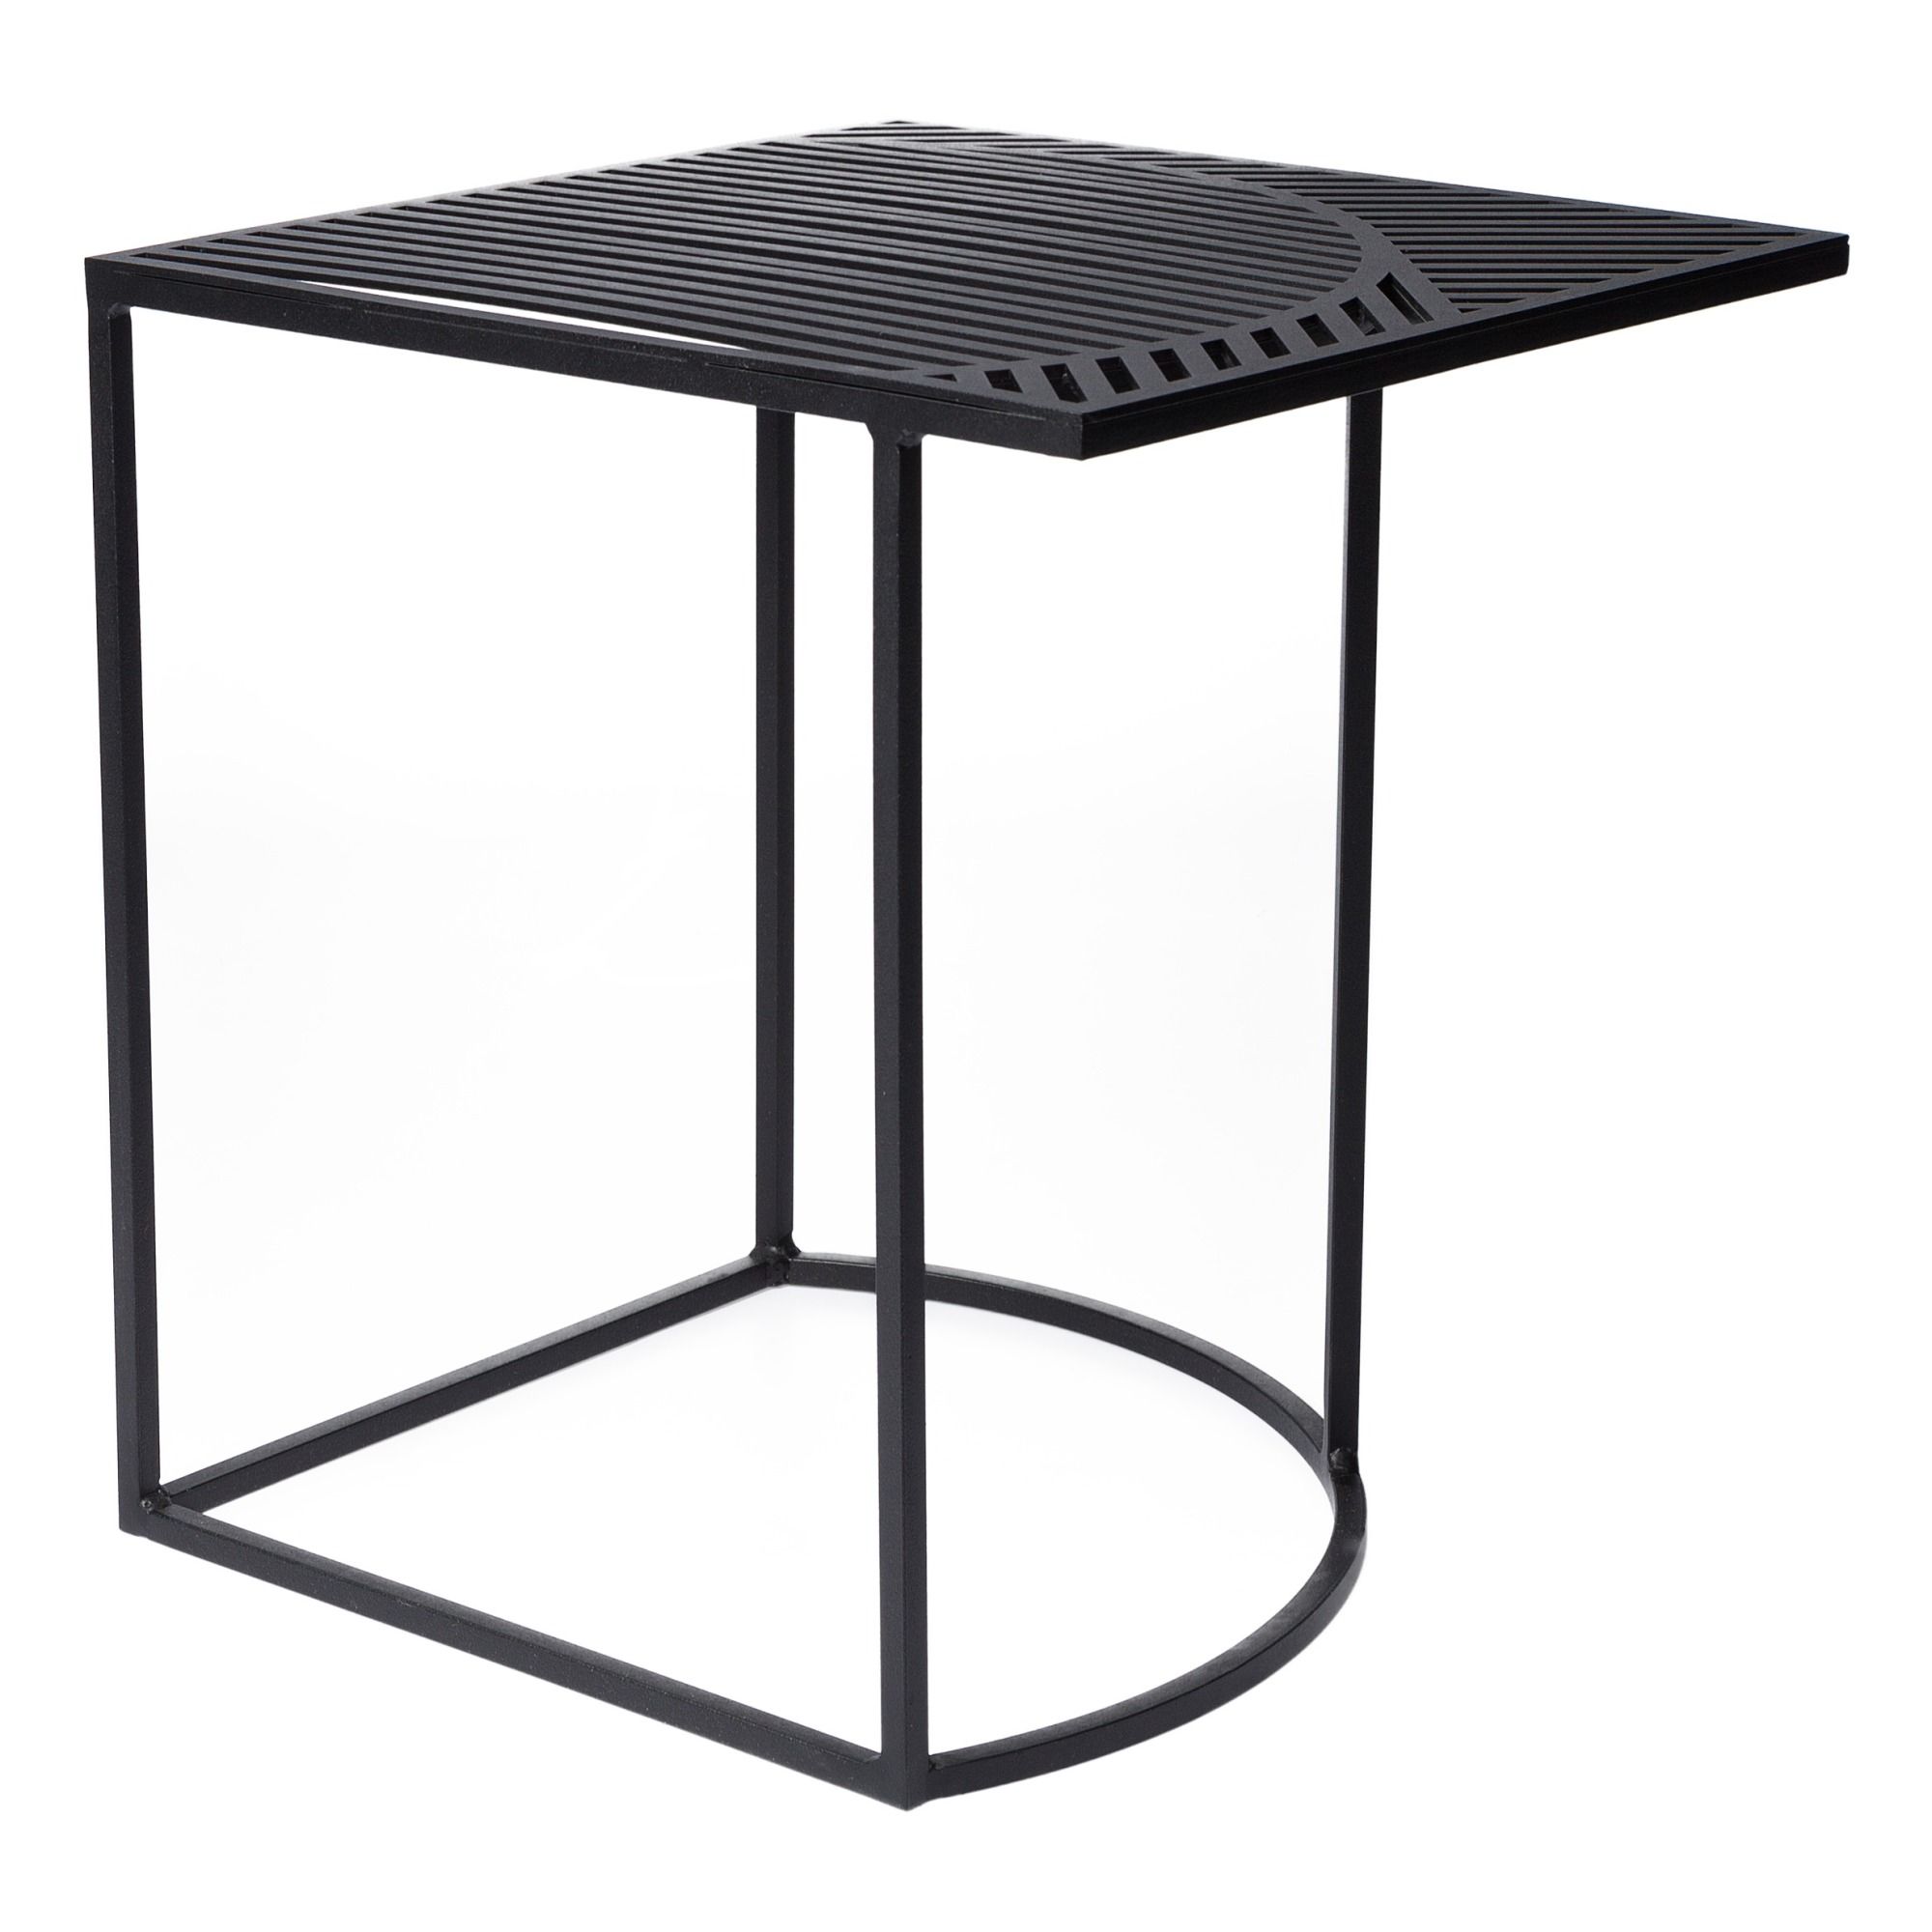 Petite friture - Table d'appoint Iso - B - Noir